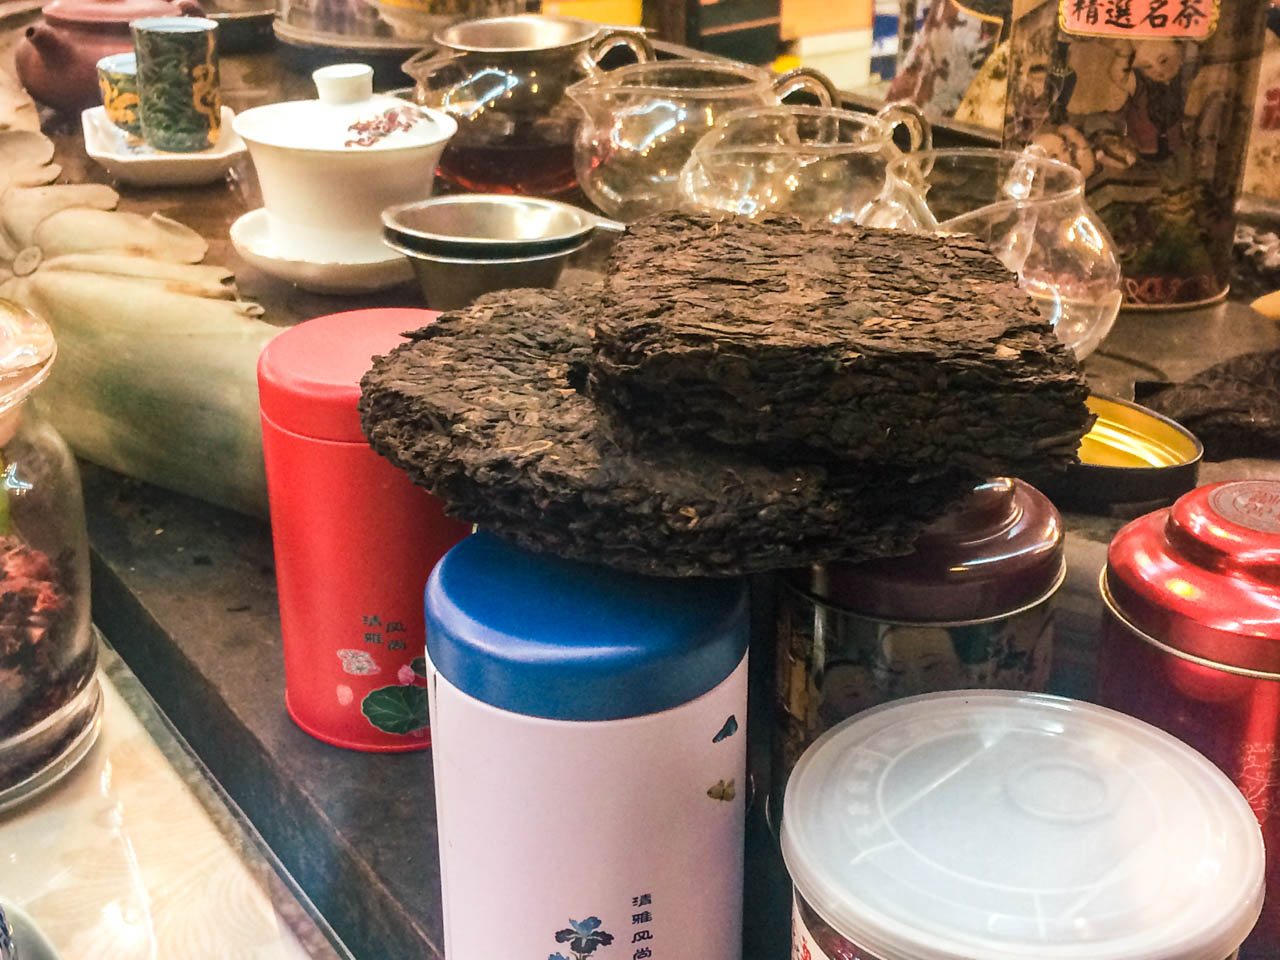 A close-up shot of pressed Pu-erh tea cakes at a traditional Chinese tea shop in Beijing, China